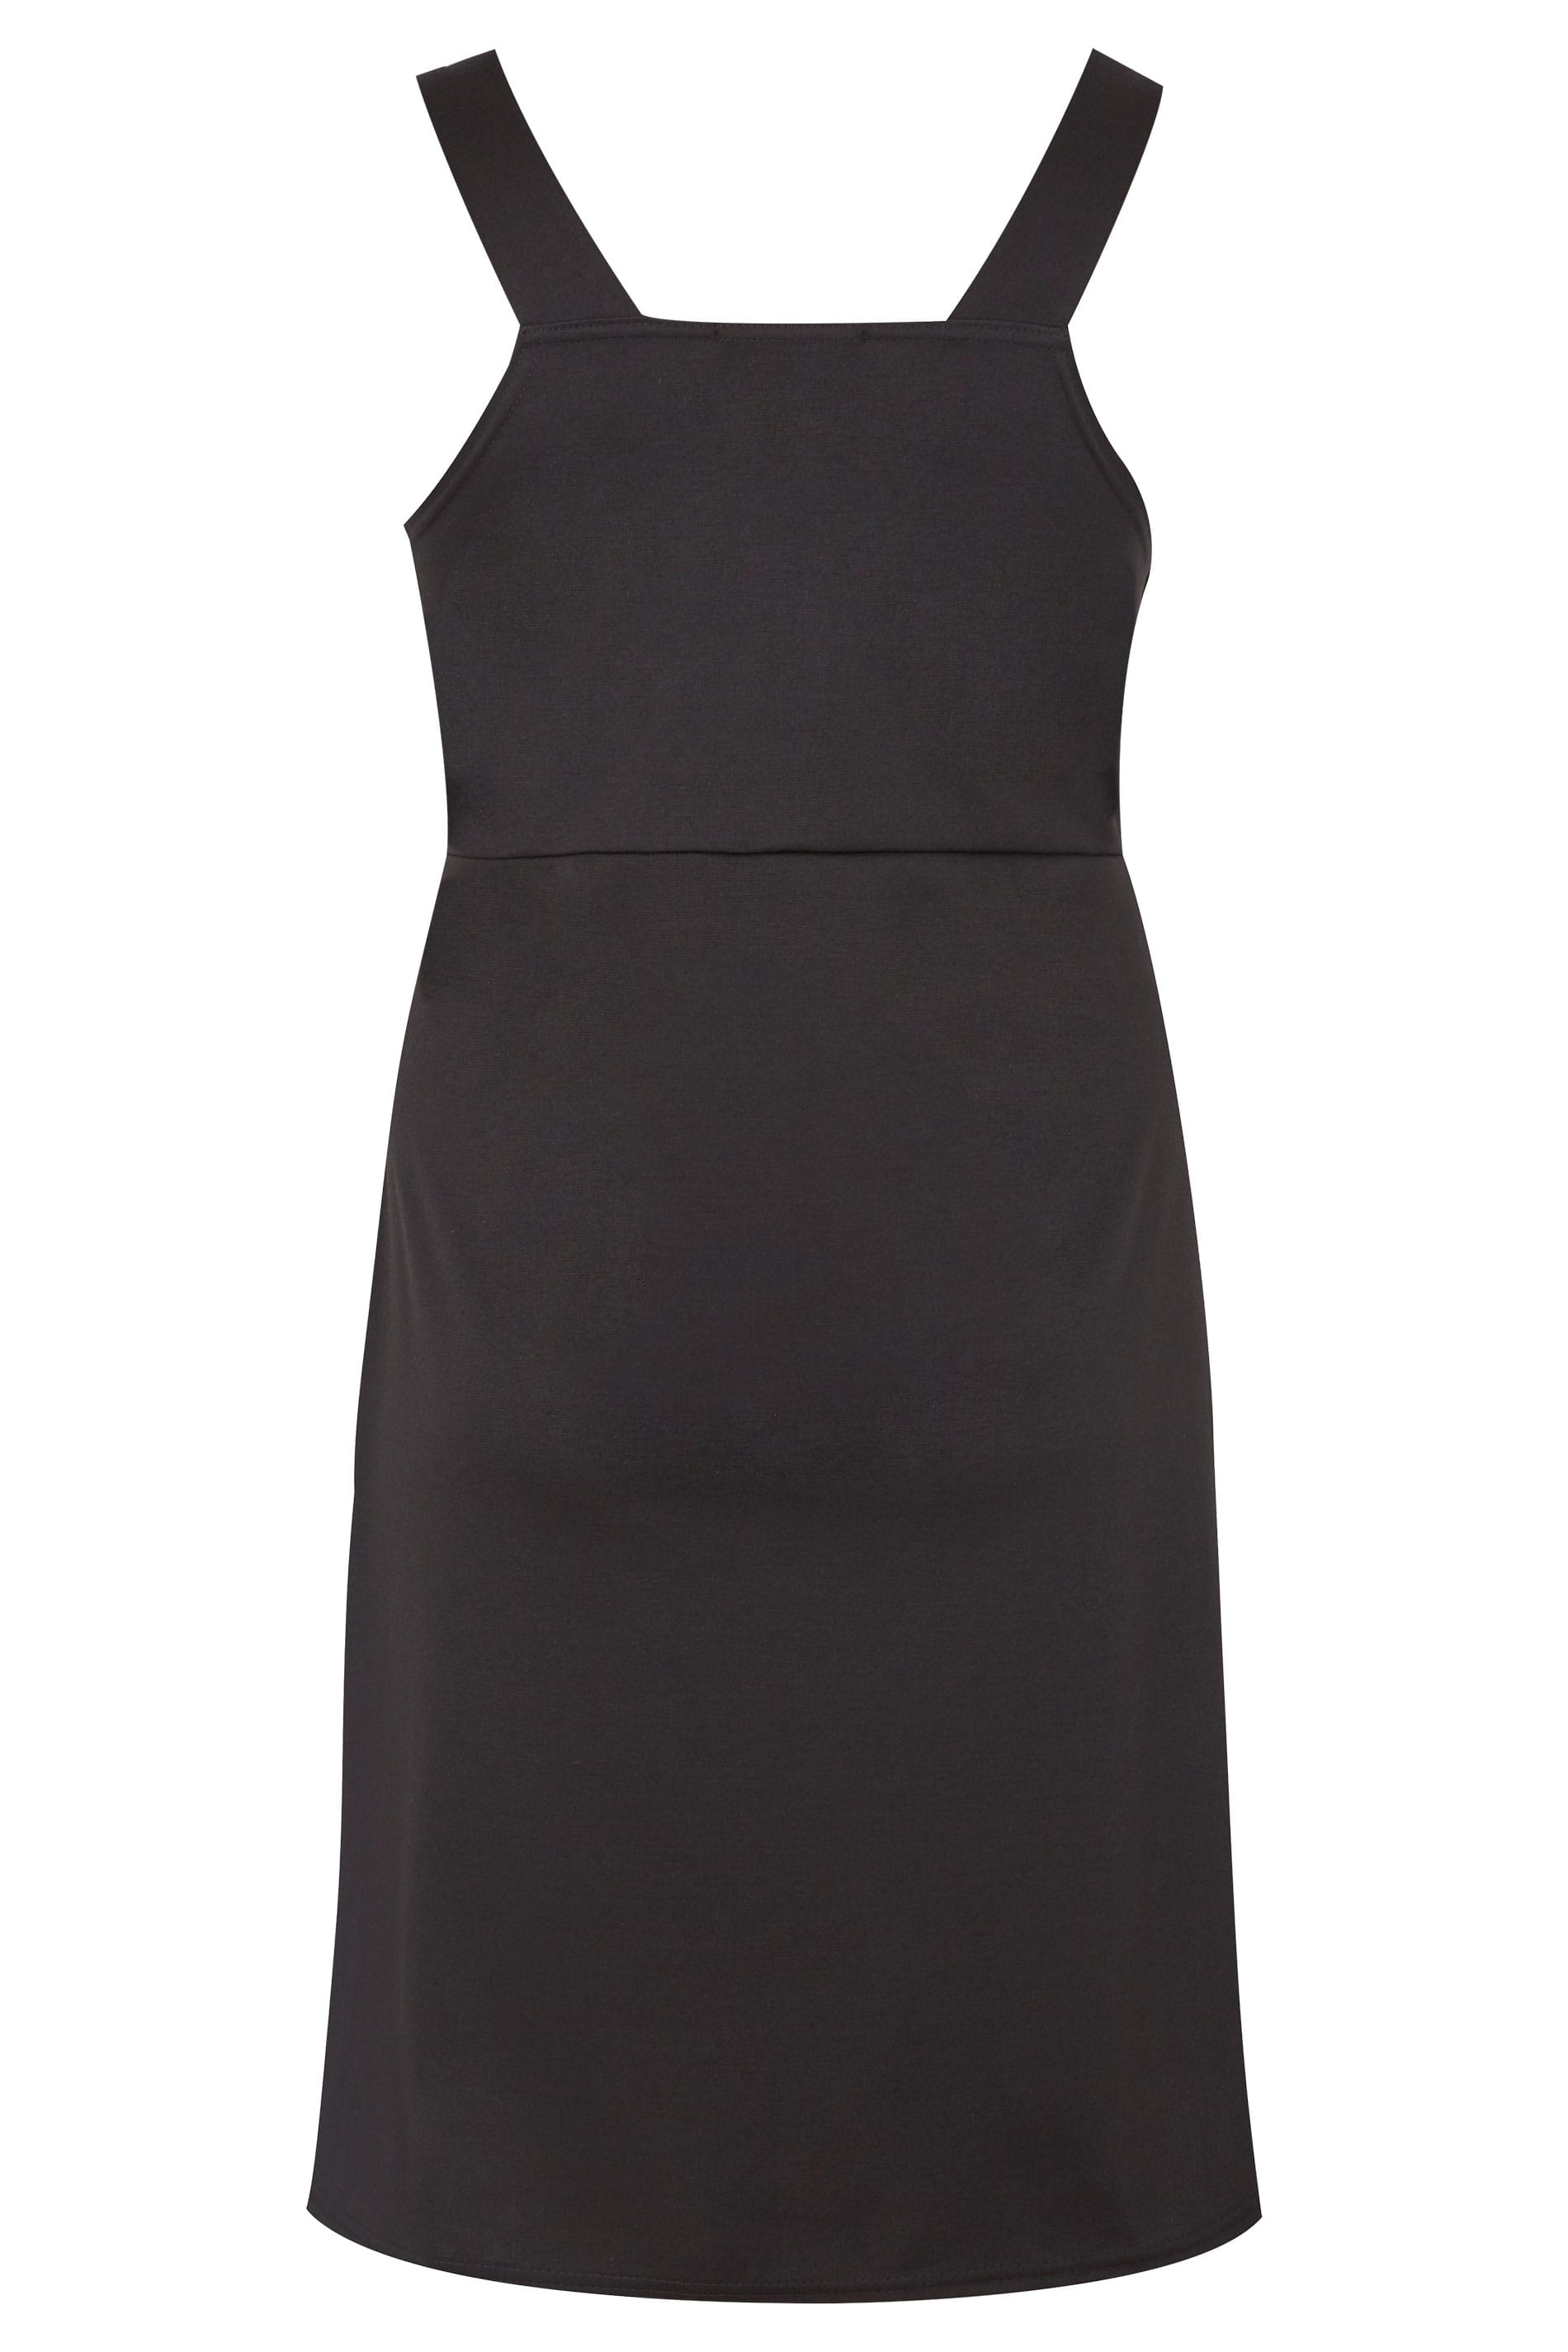 Black Pinafore With Ring Detail, Plus size 16 to 36